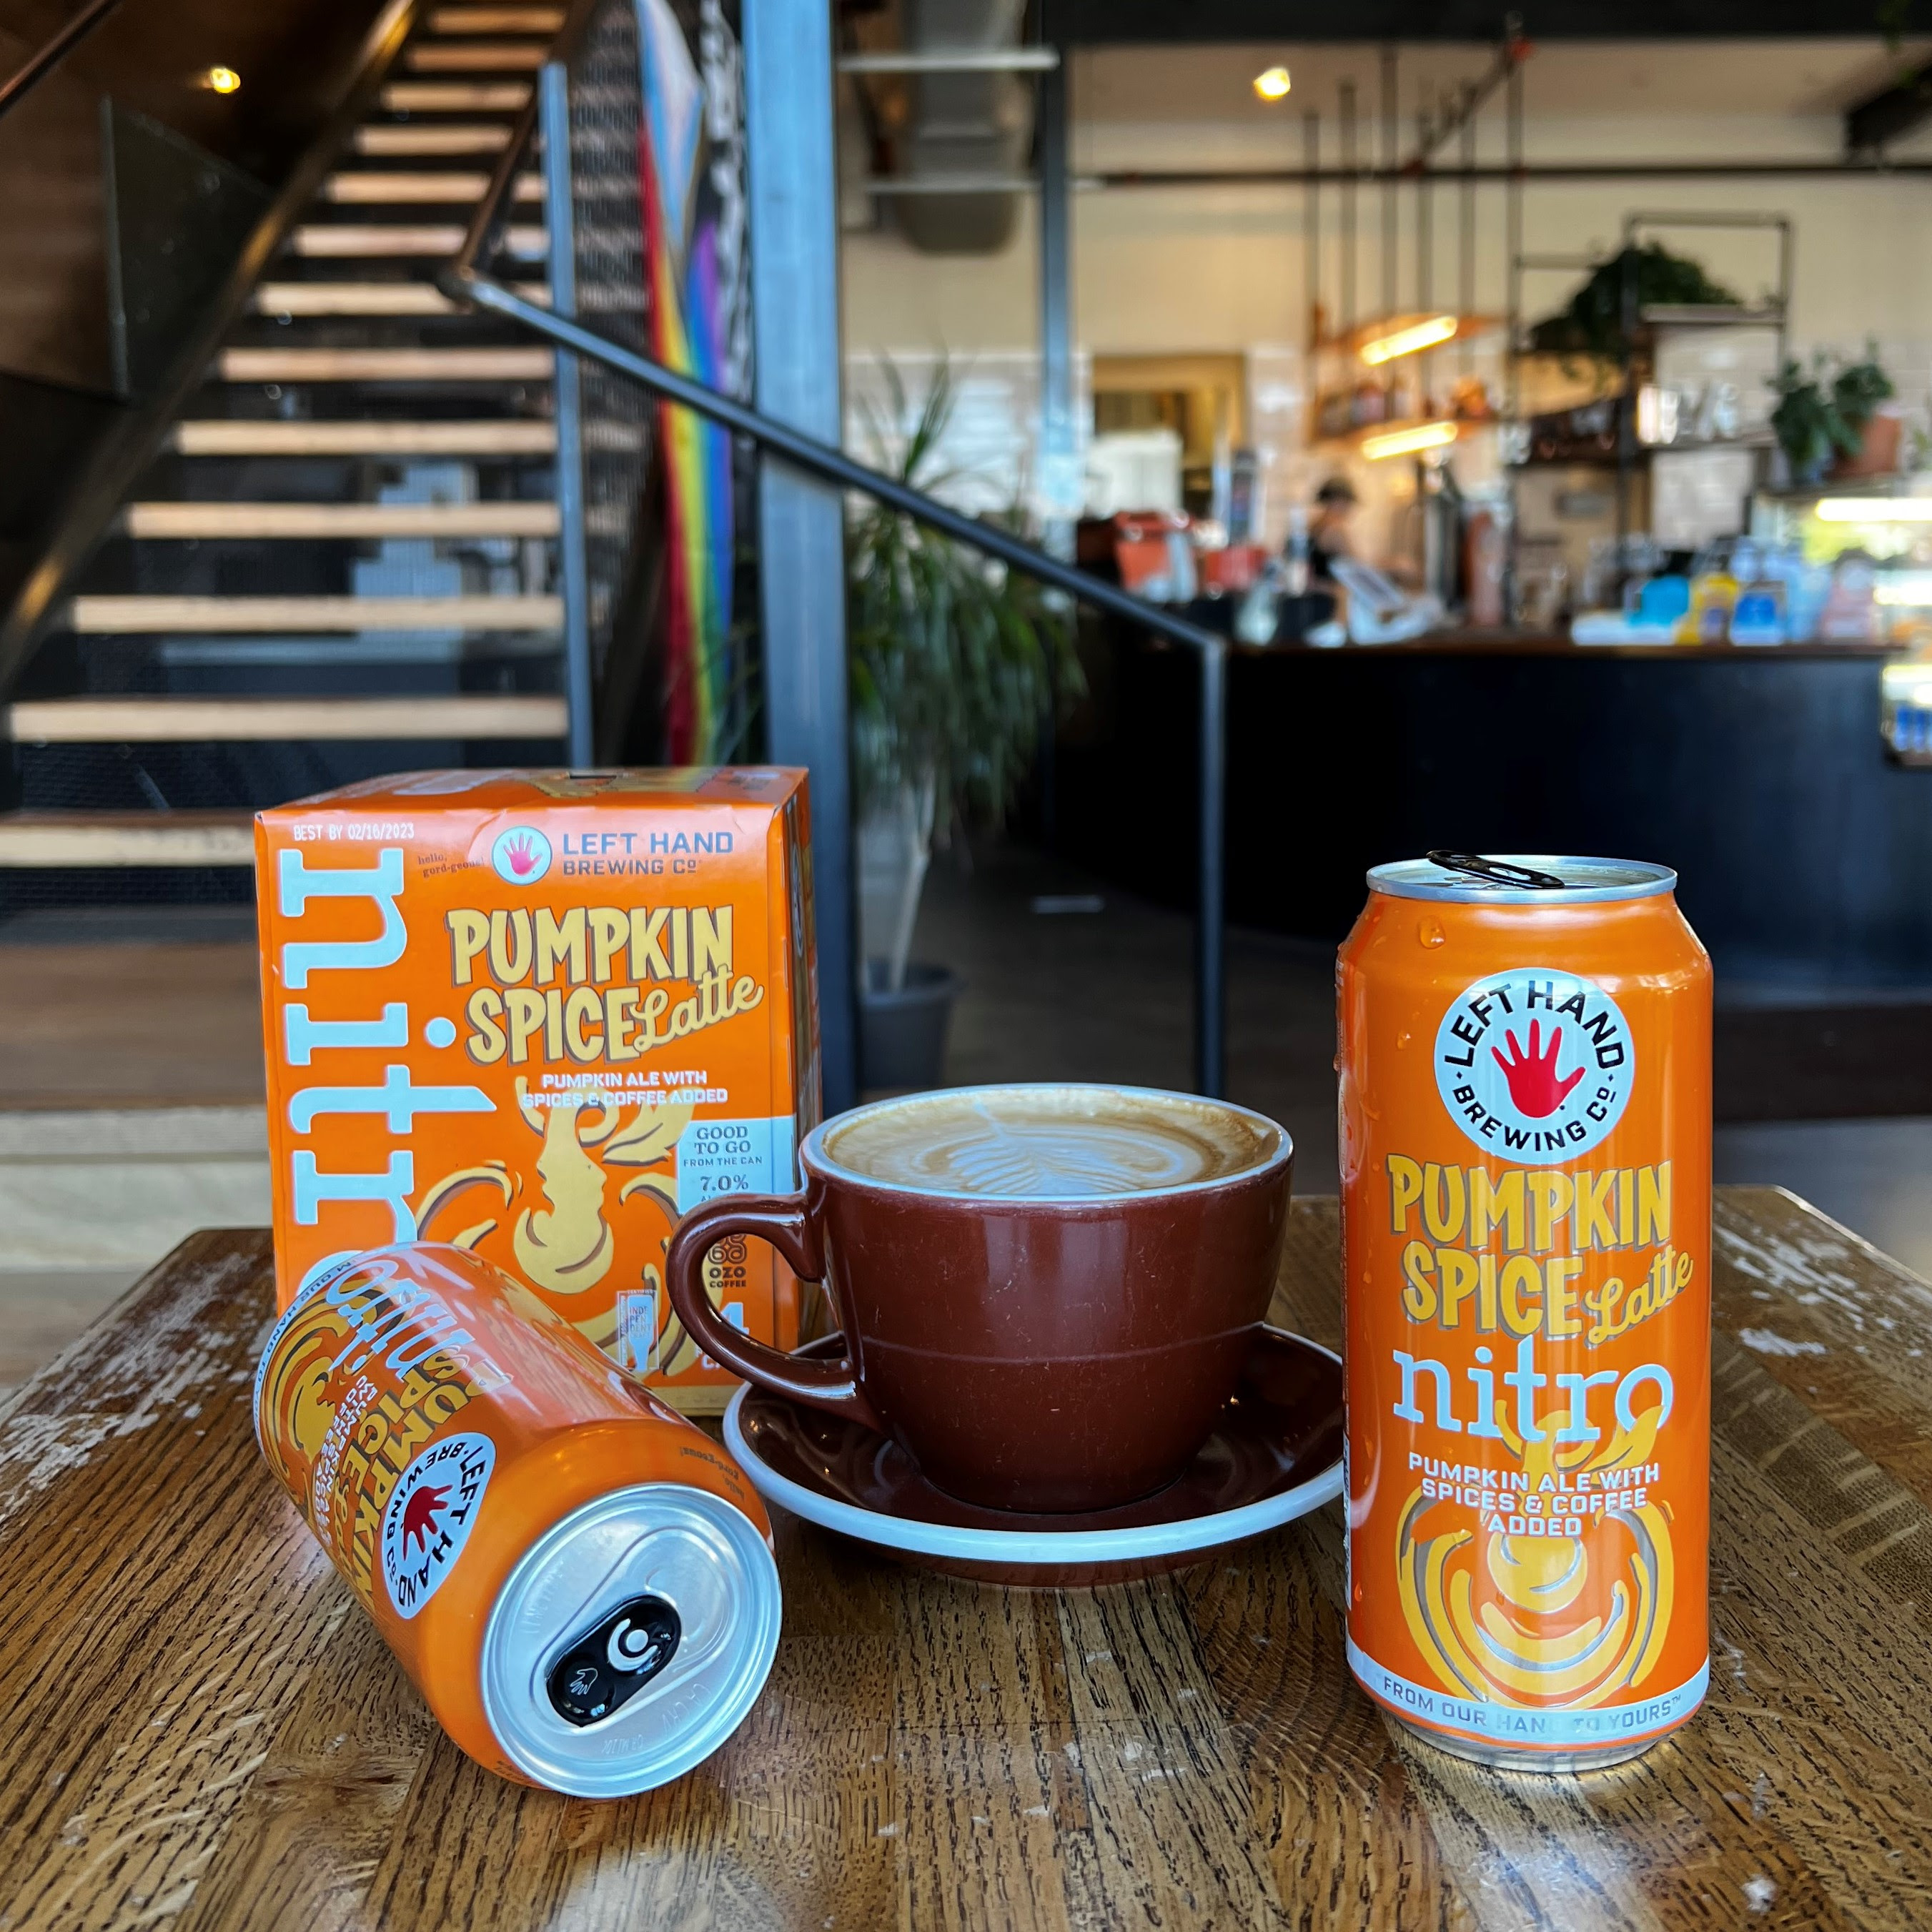 image of Left Hand Pumpkin Spice Latte Nitro courtesy of Left Hand Brewing